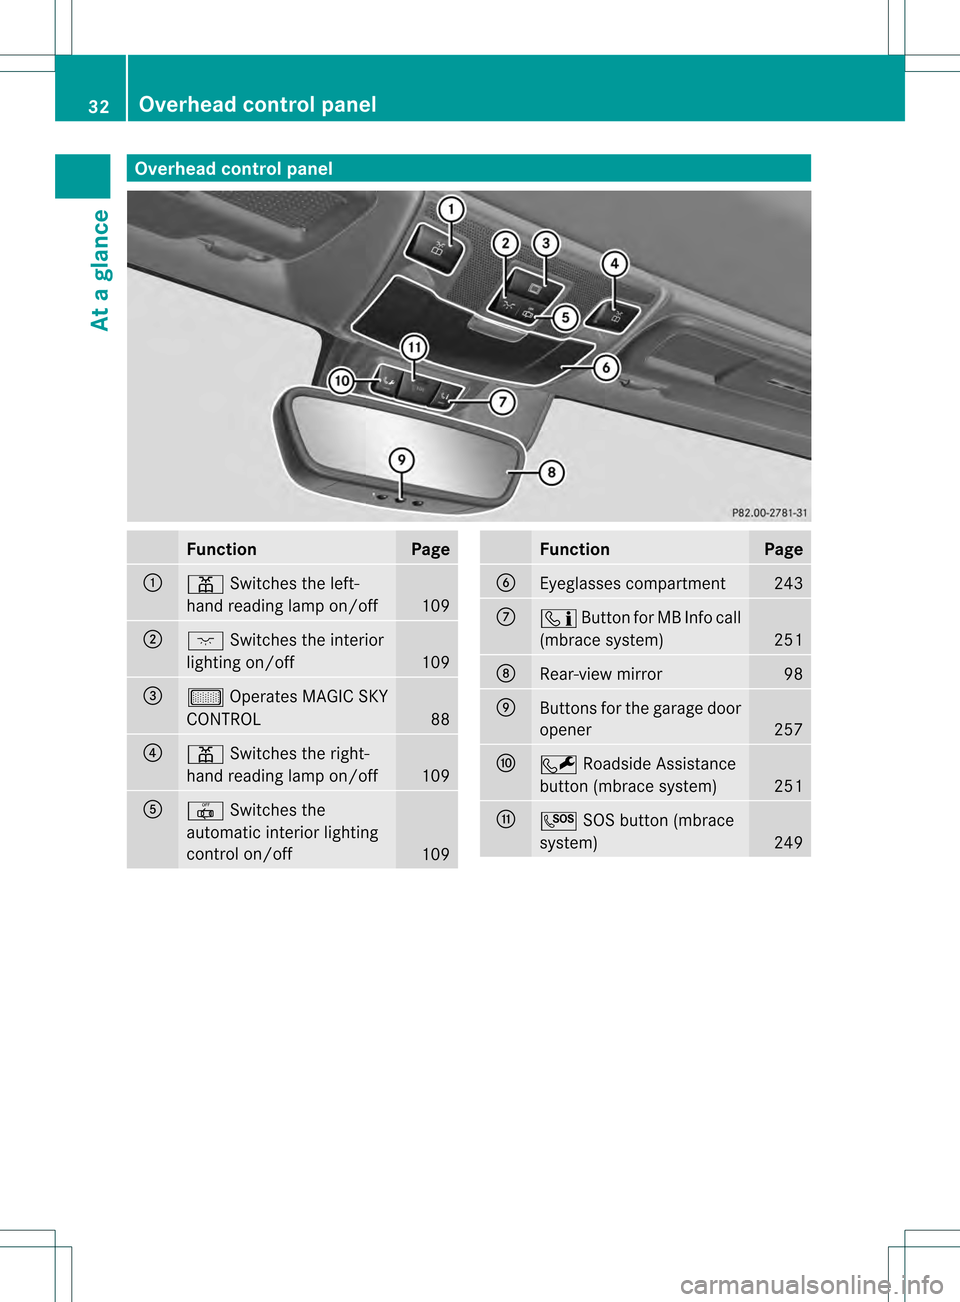 MERCEDES-BENZ SLK250 2012 R172 Owners Guide Overhea
dcontrol panel Function Page
0002
0010
Switches the left-
hand reading lamp on/off 109
0003
0002
Switches the interior
lighting on/off 109
0023
000C
Operates MAGIC SKY
CONTROL 88
0022
0010
Swi